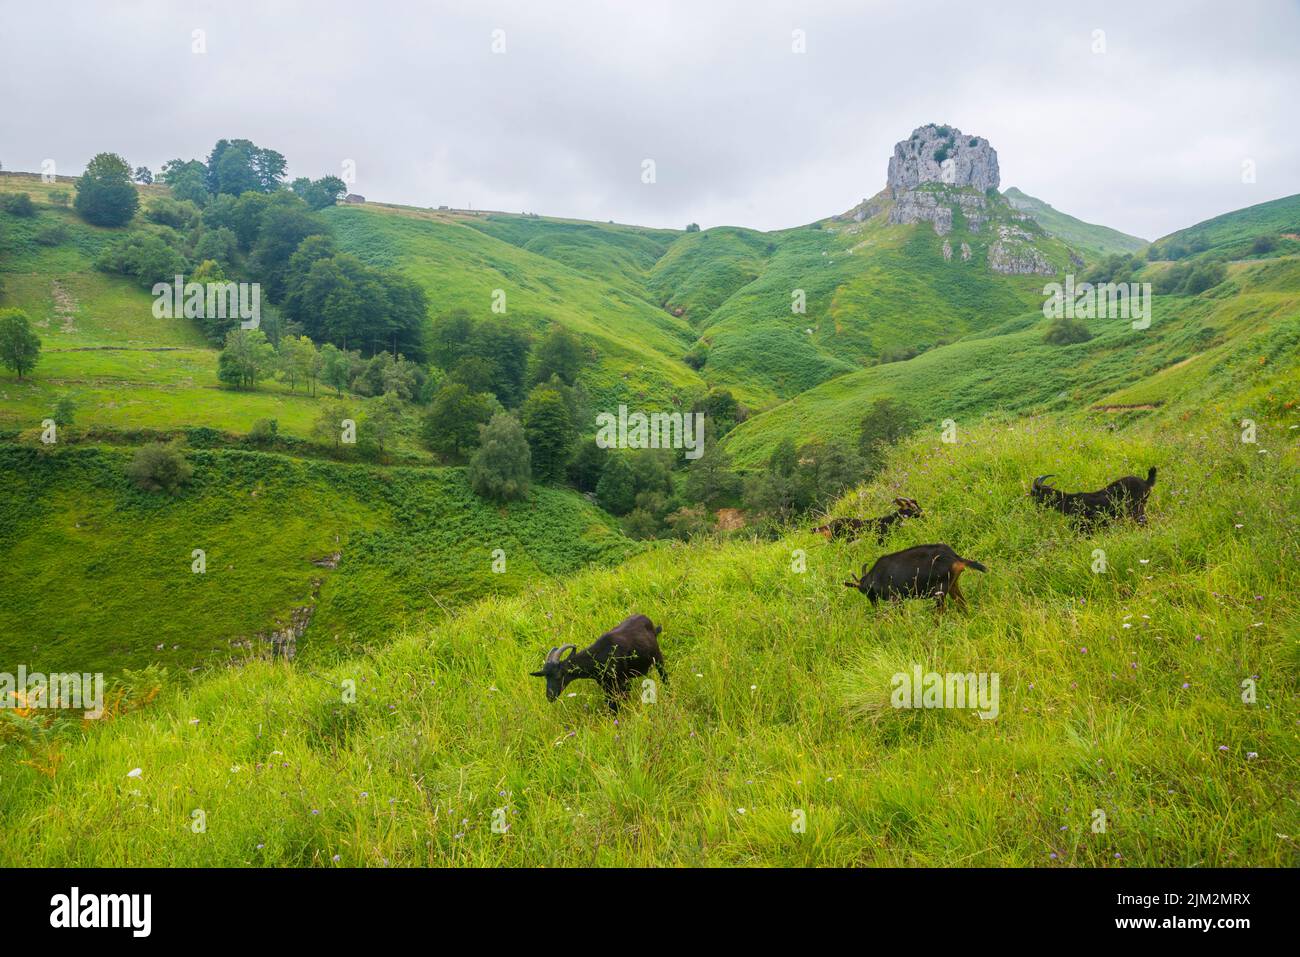 Goats and landscape. El Caracol mountain pass, Collados del Ason Nature Reserve, Cantabria, Spain. Stock Photo